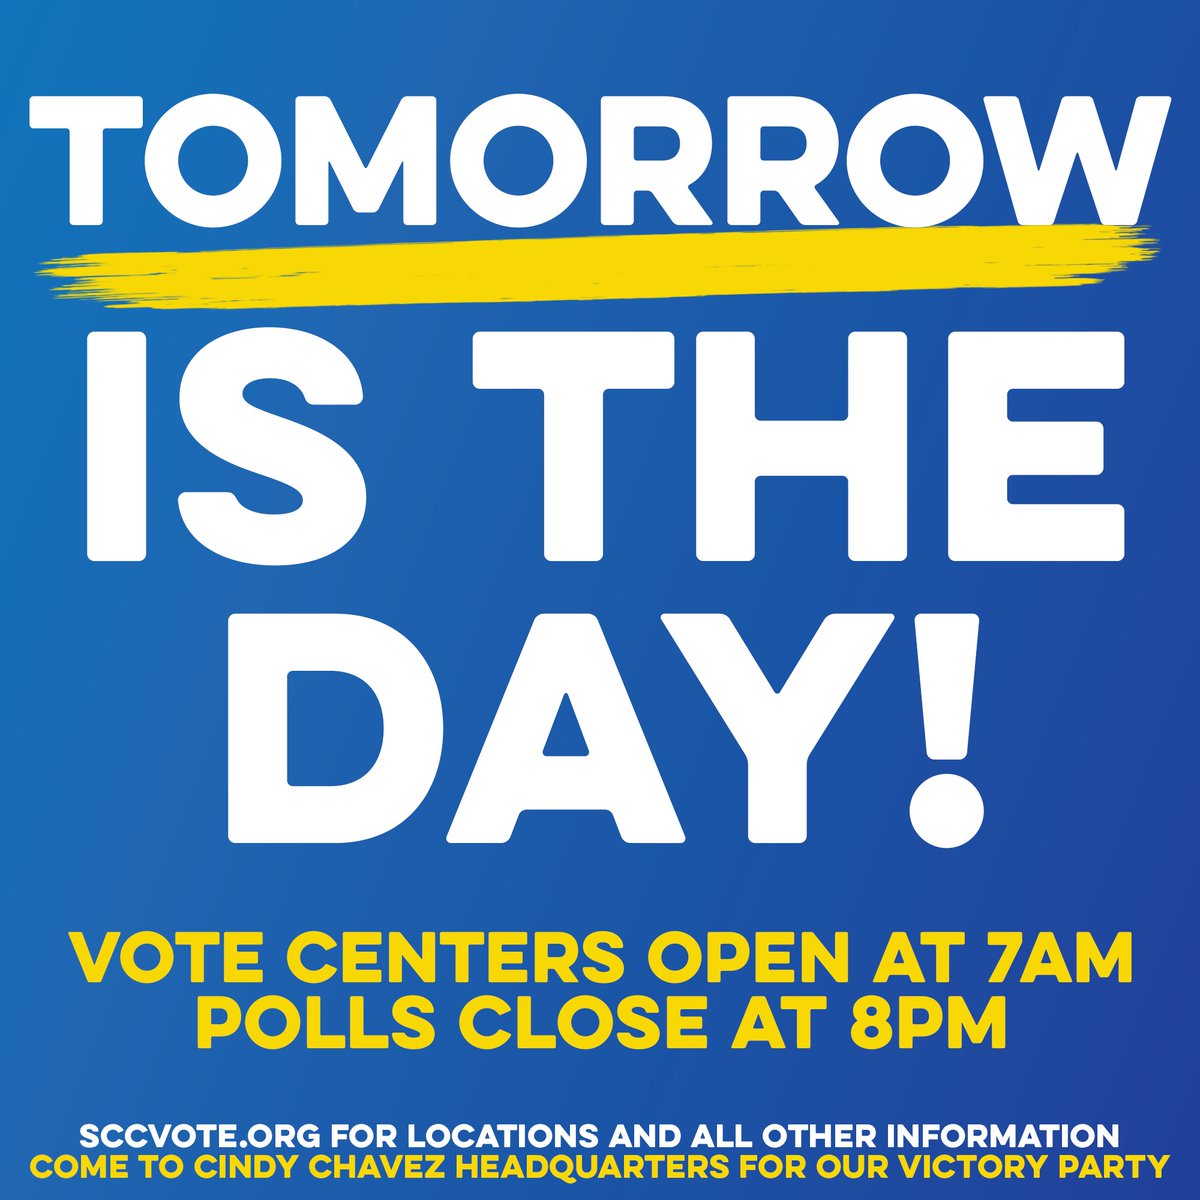 There are 24 hours left to vote! Have you voted yet? #cindychavezformayor